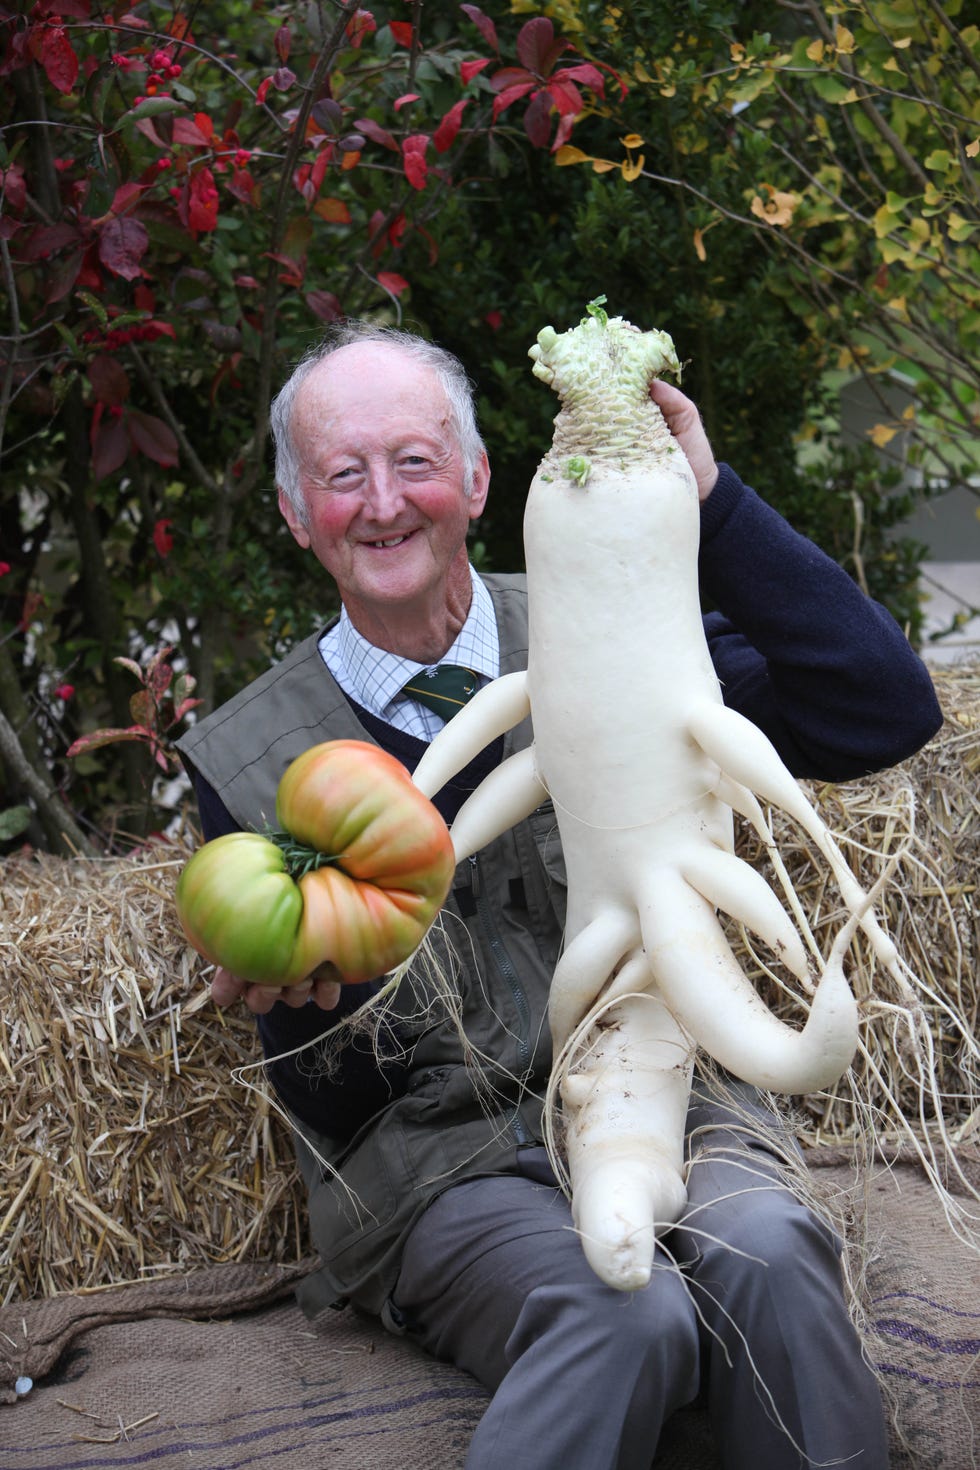 Peter Glazebrook with a giant tomato and giant radish at Malvern Autumn Show